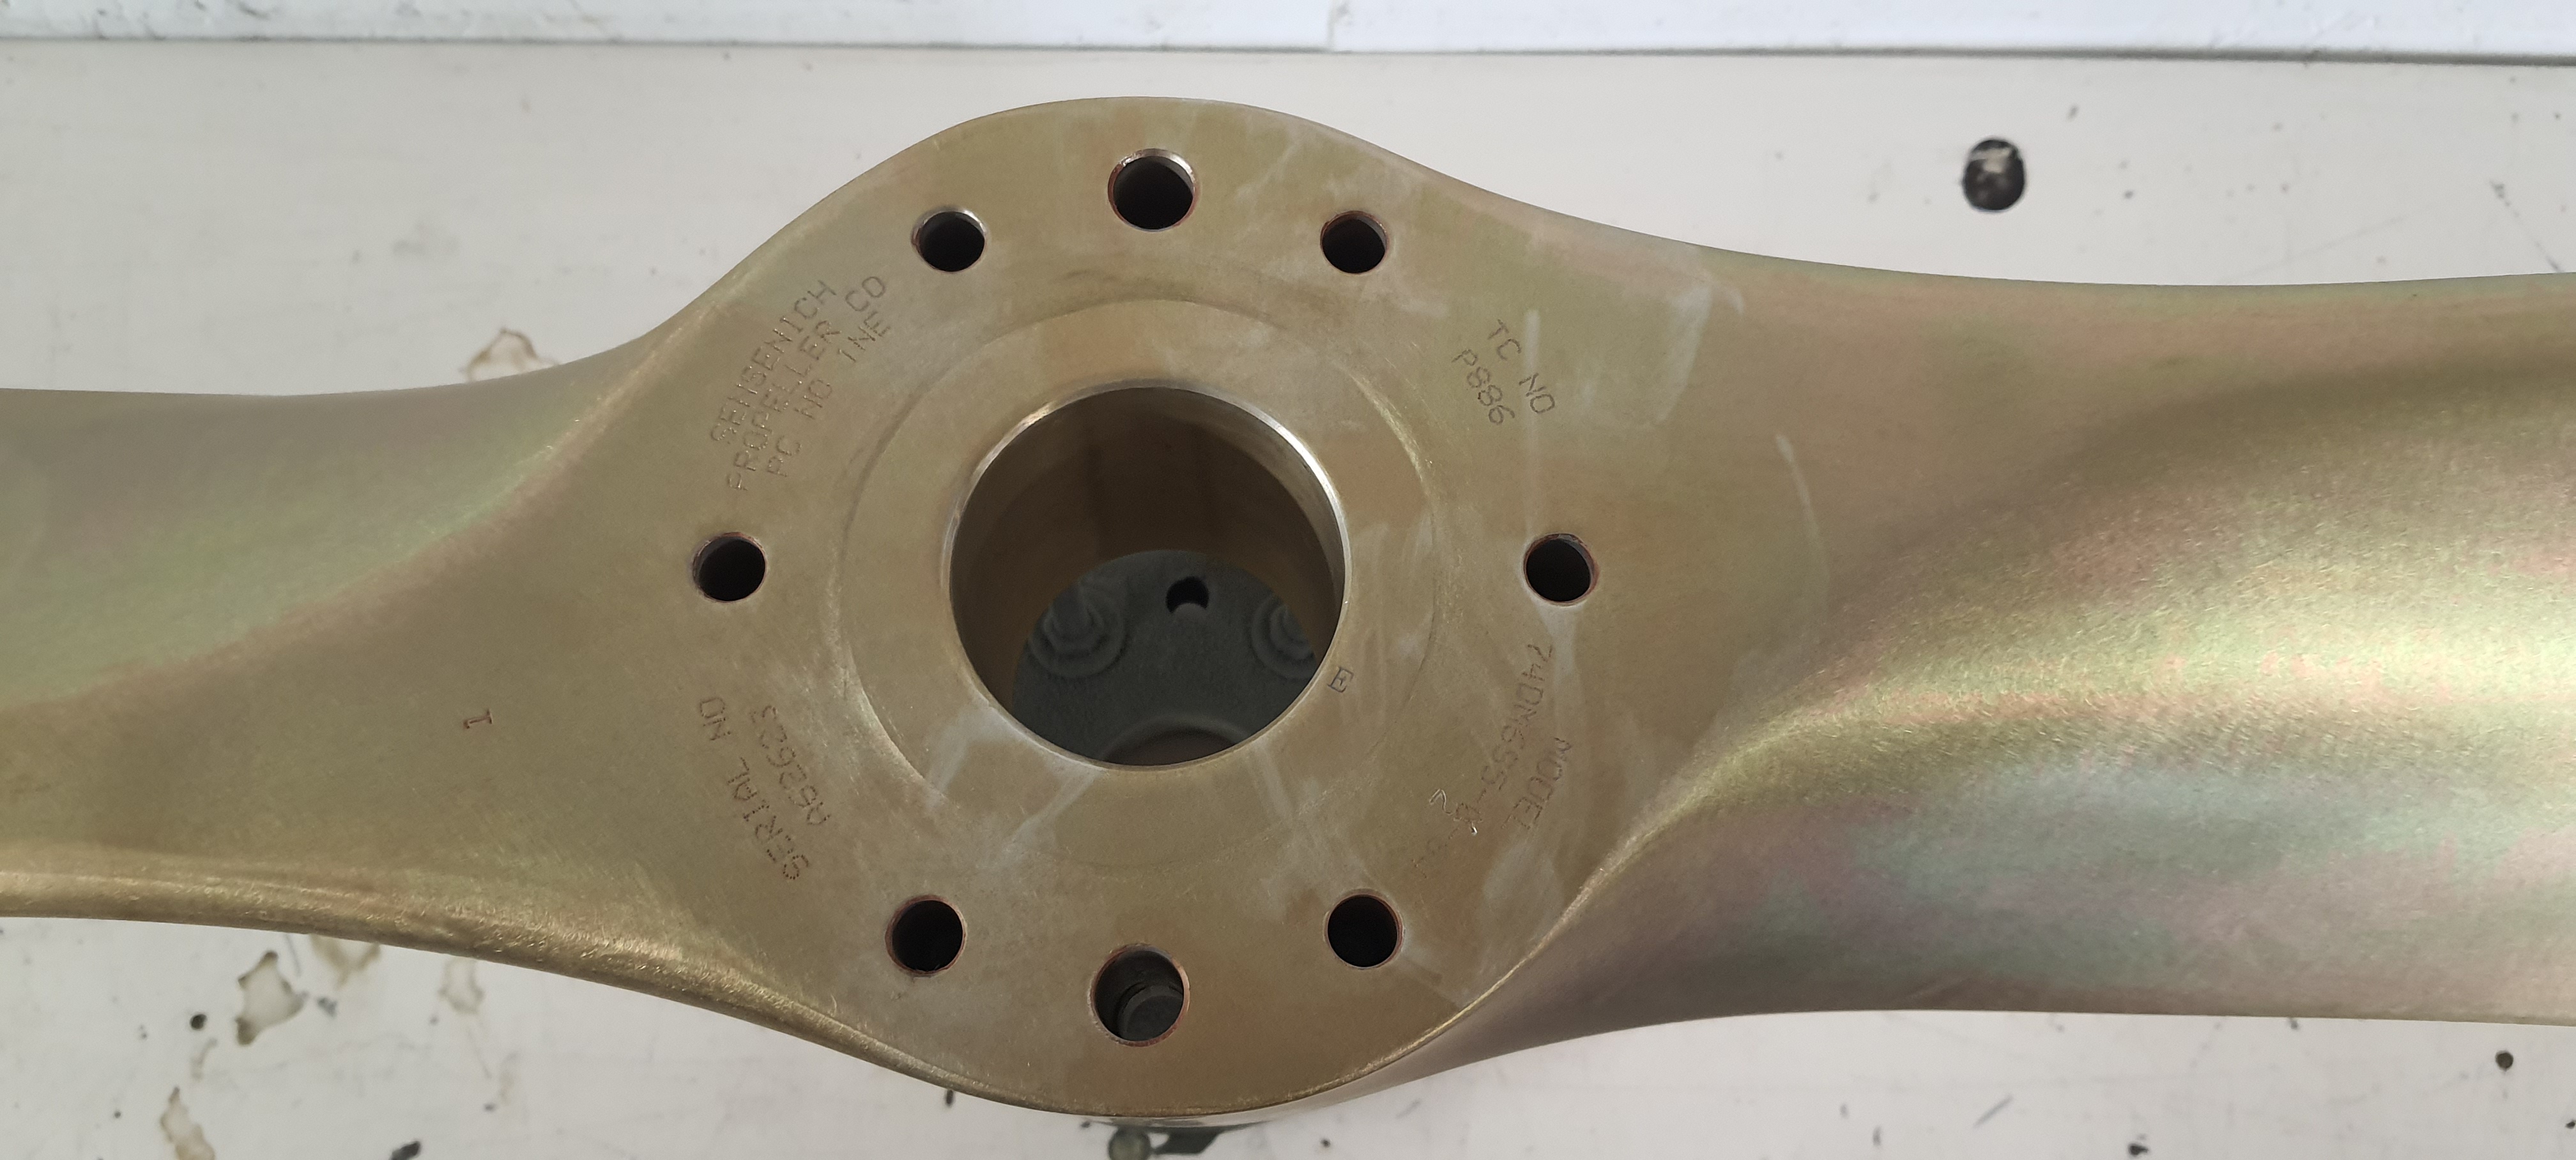 Propeller hub after surface treatment with alodine - Airservices France